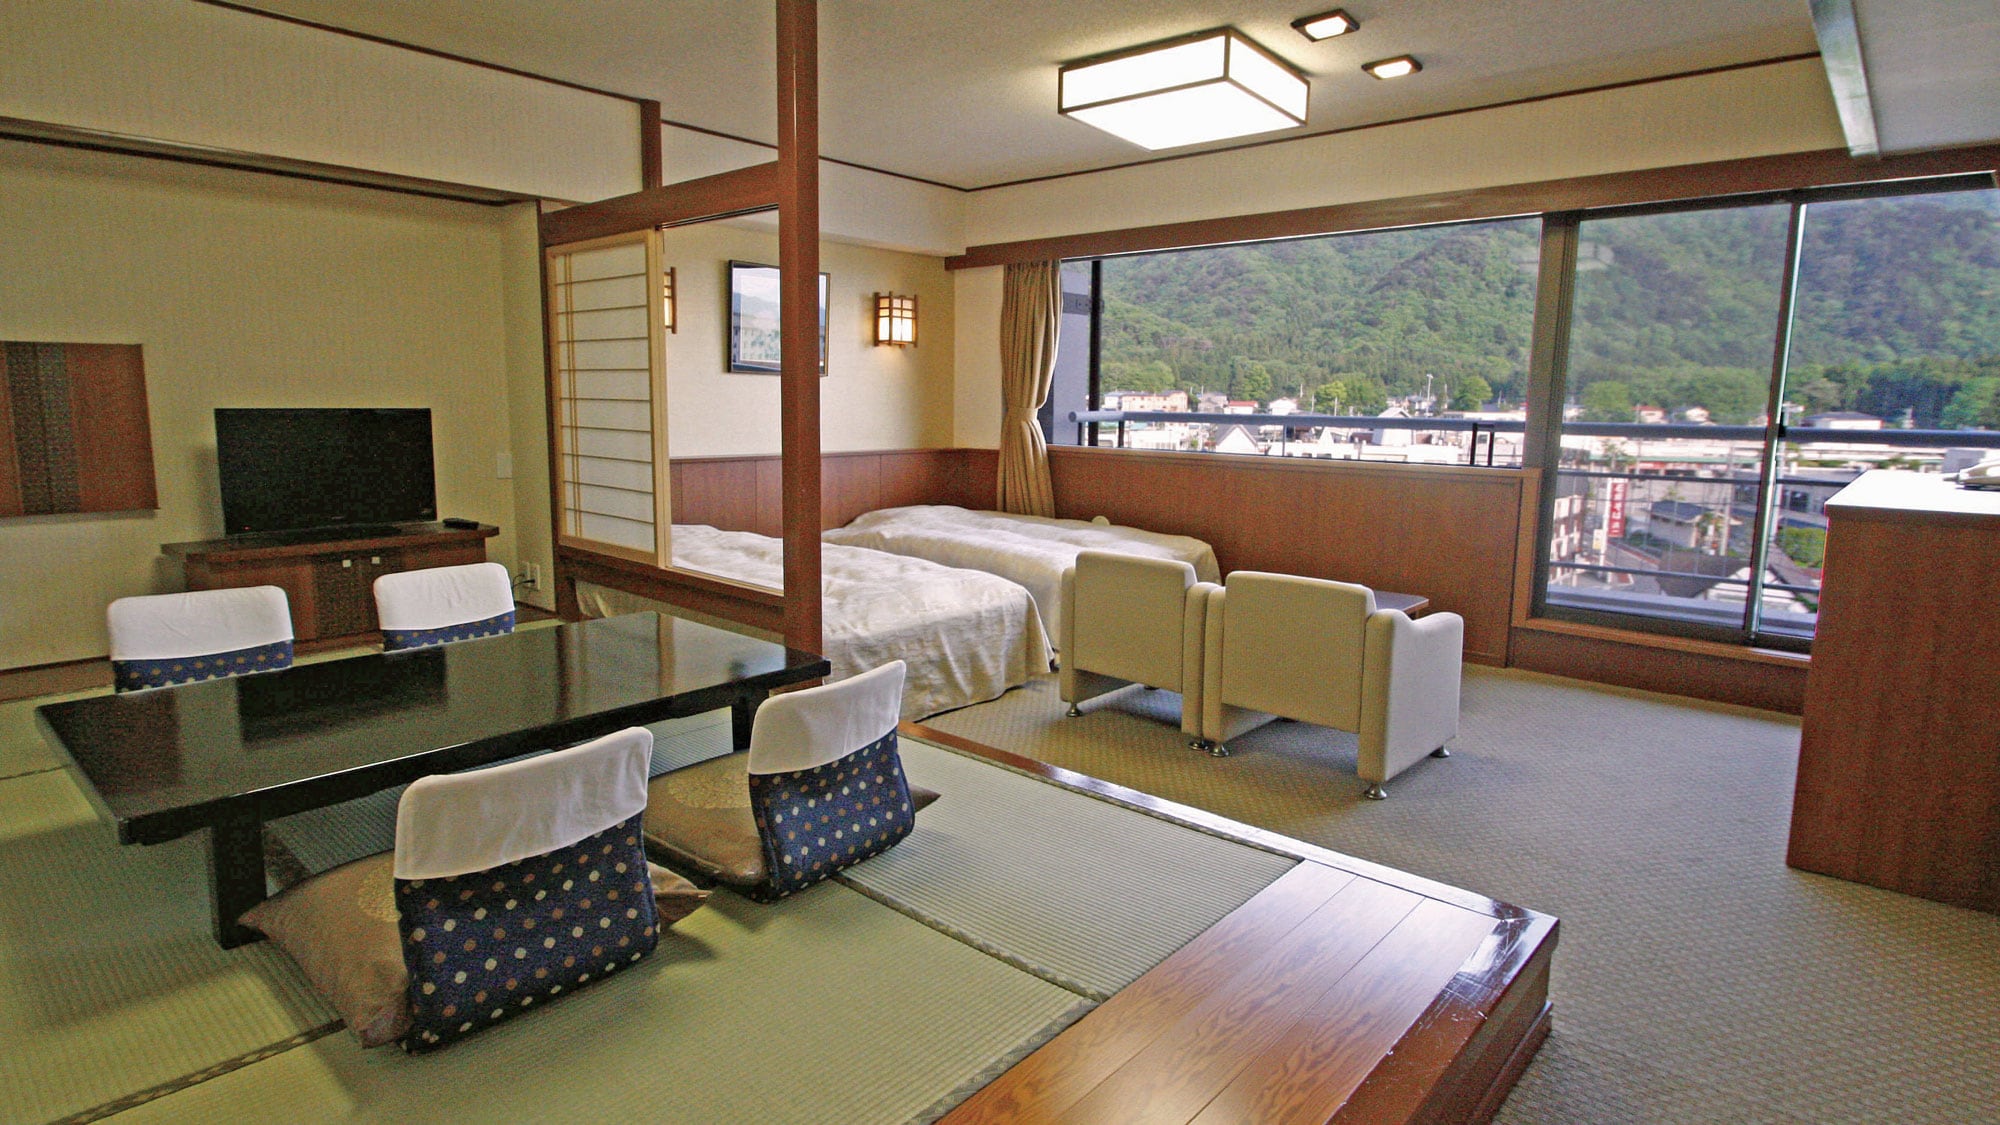 * [Standard Japanese and Western rooms: 6 tatami mats + twin beds (example)]